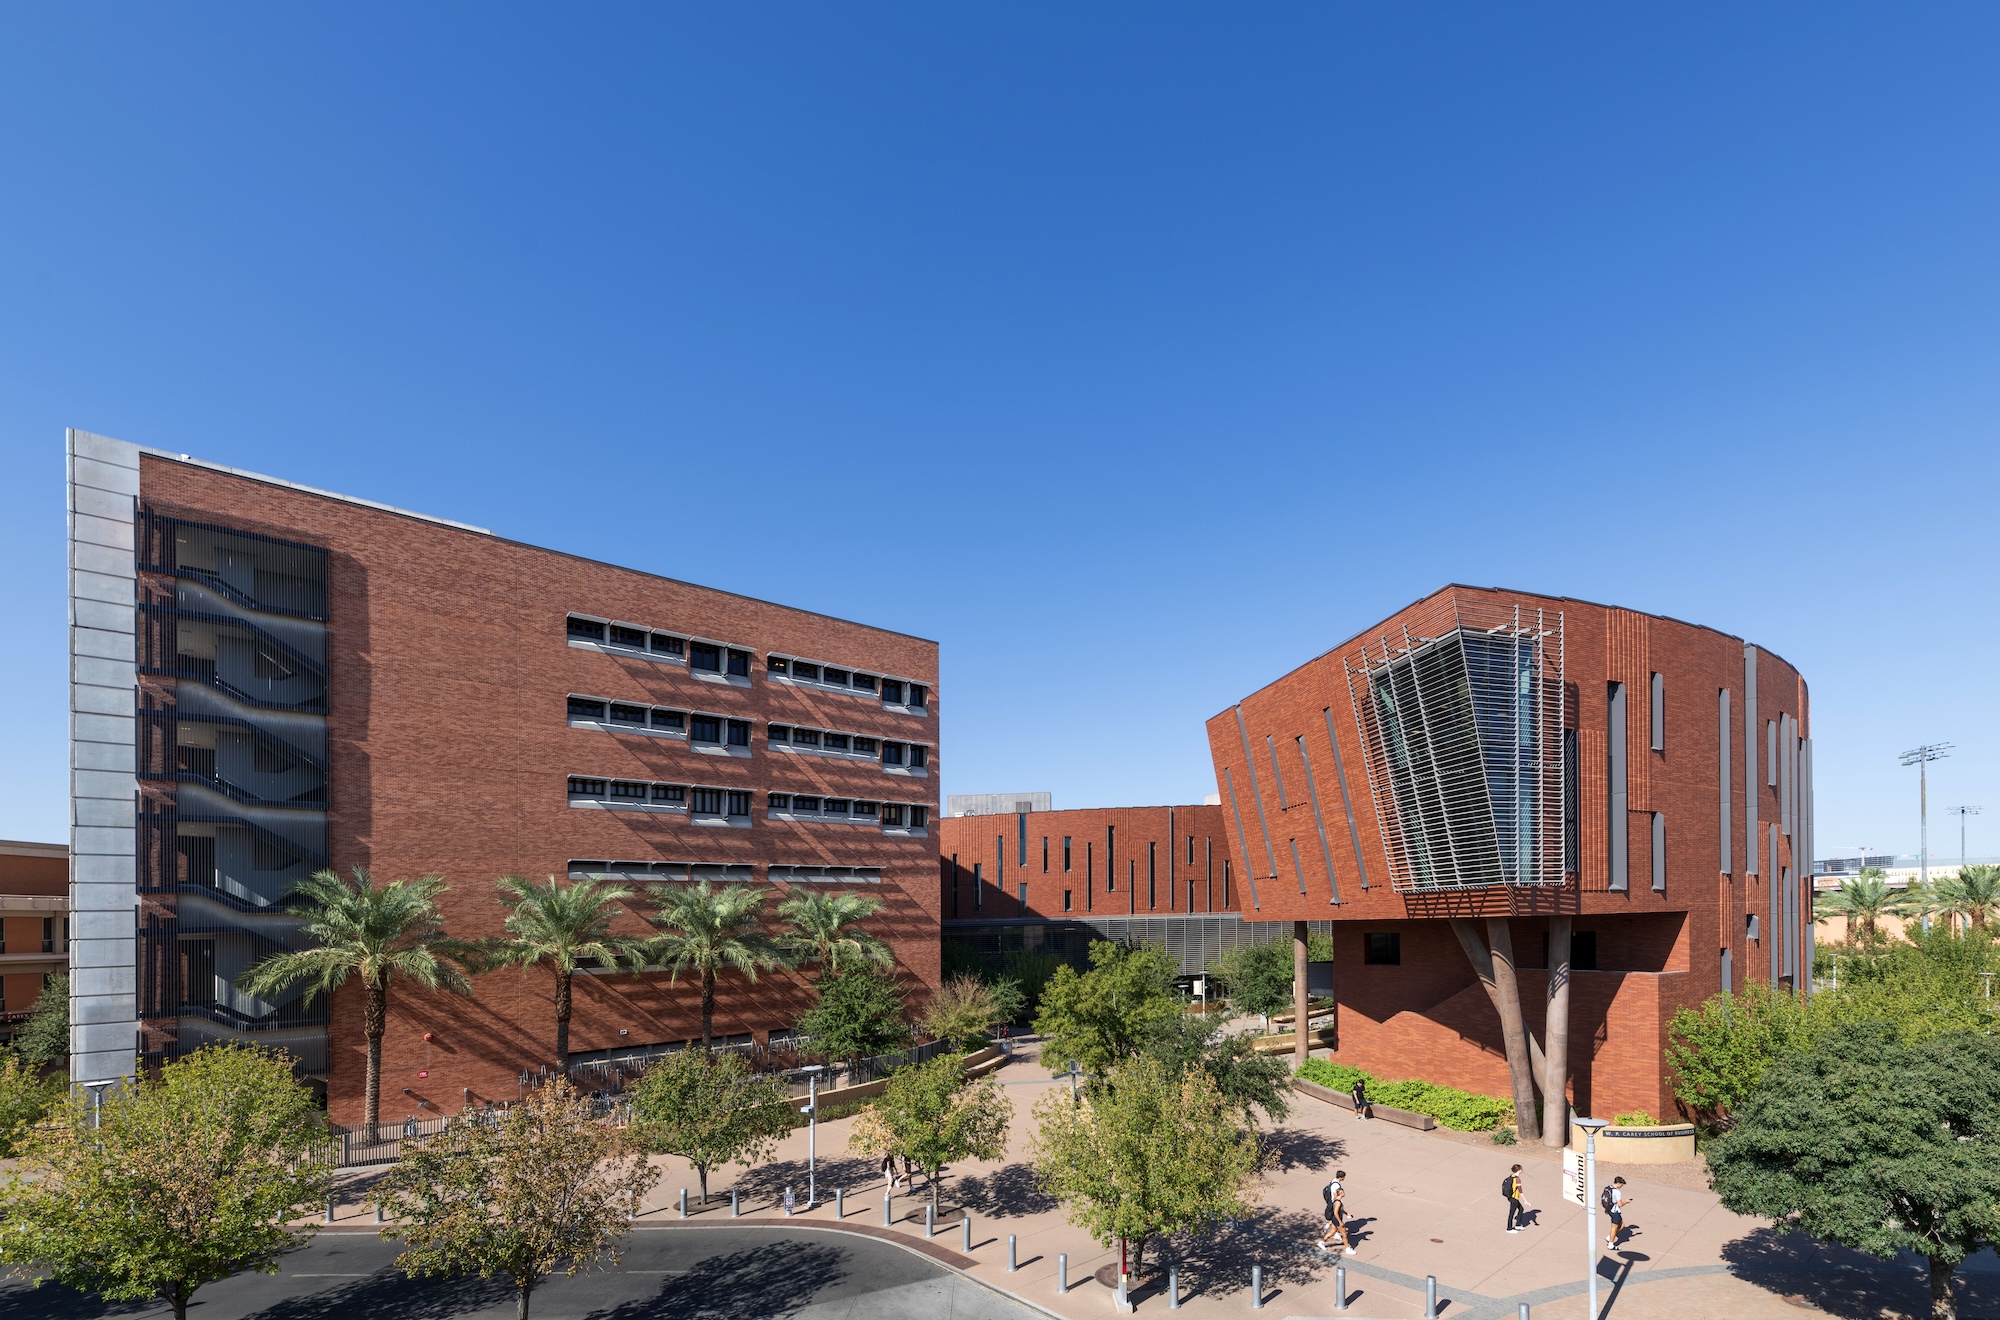 BAC and McCord Hall at the Tempe campus